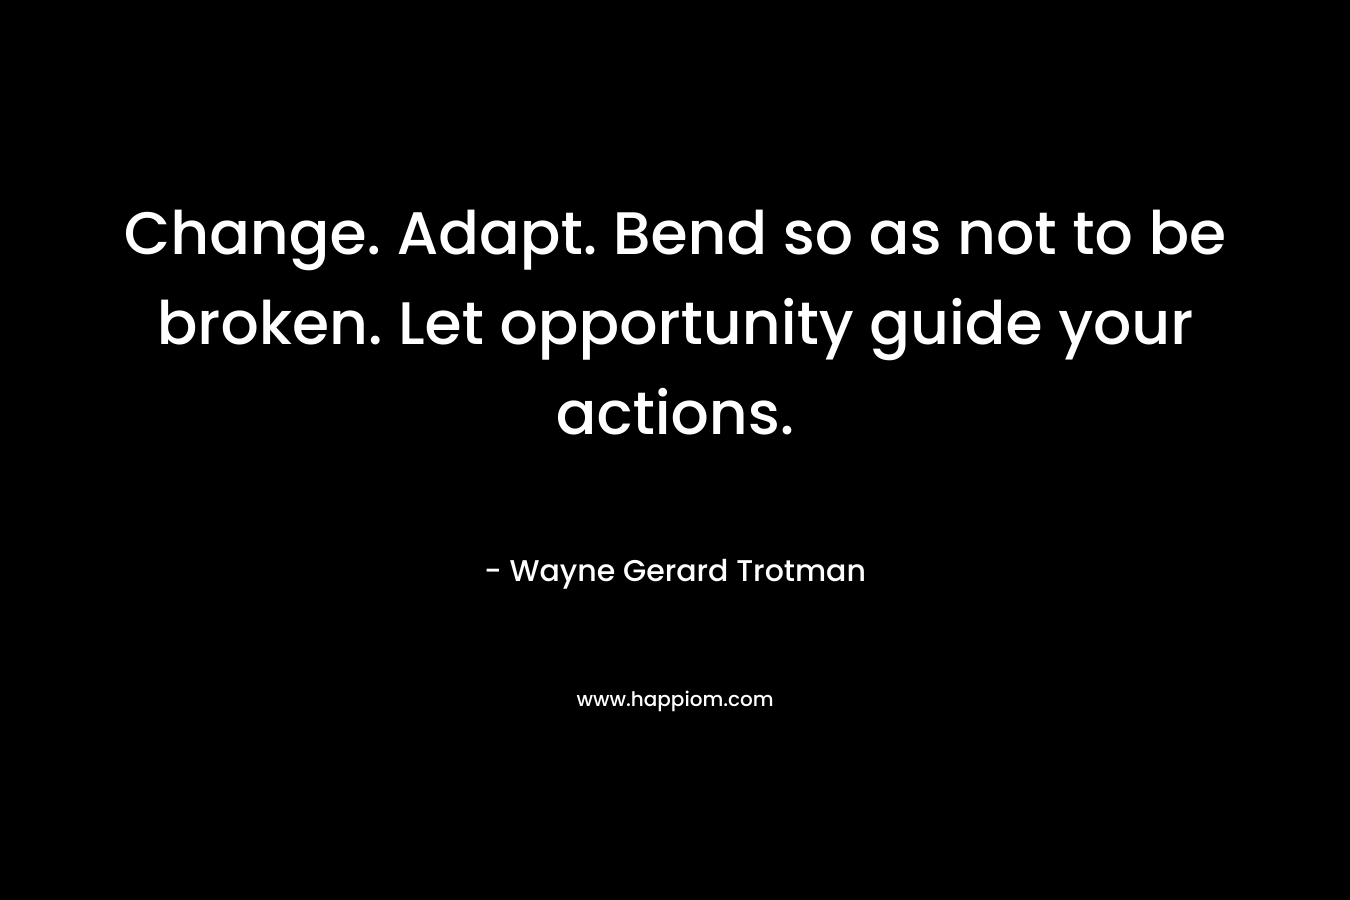 Change. Adapt. Bend so as not to be broken. Let opportunity guide your actions.